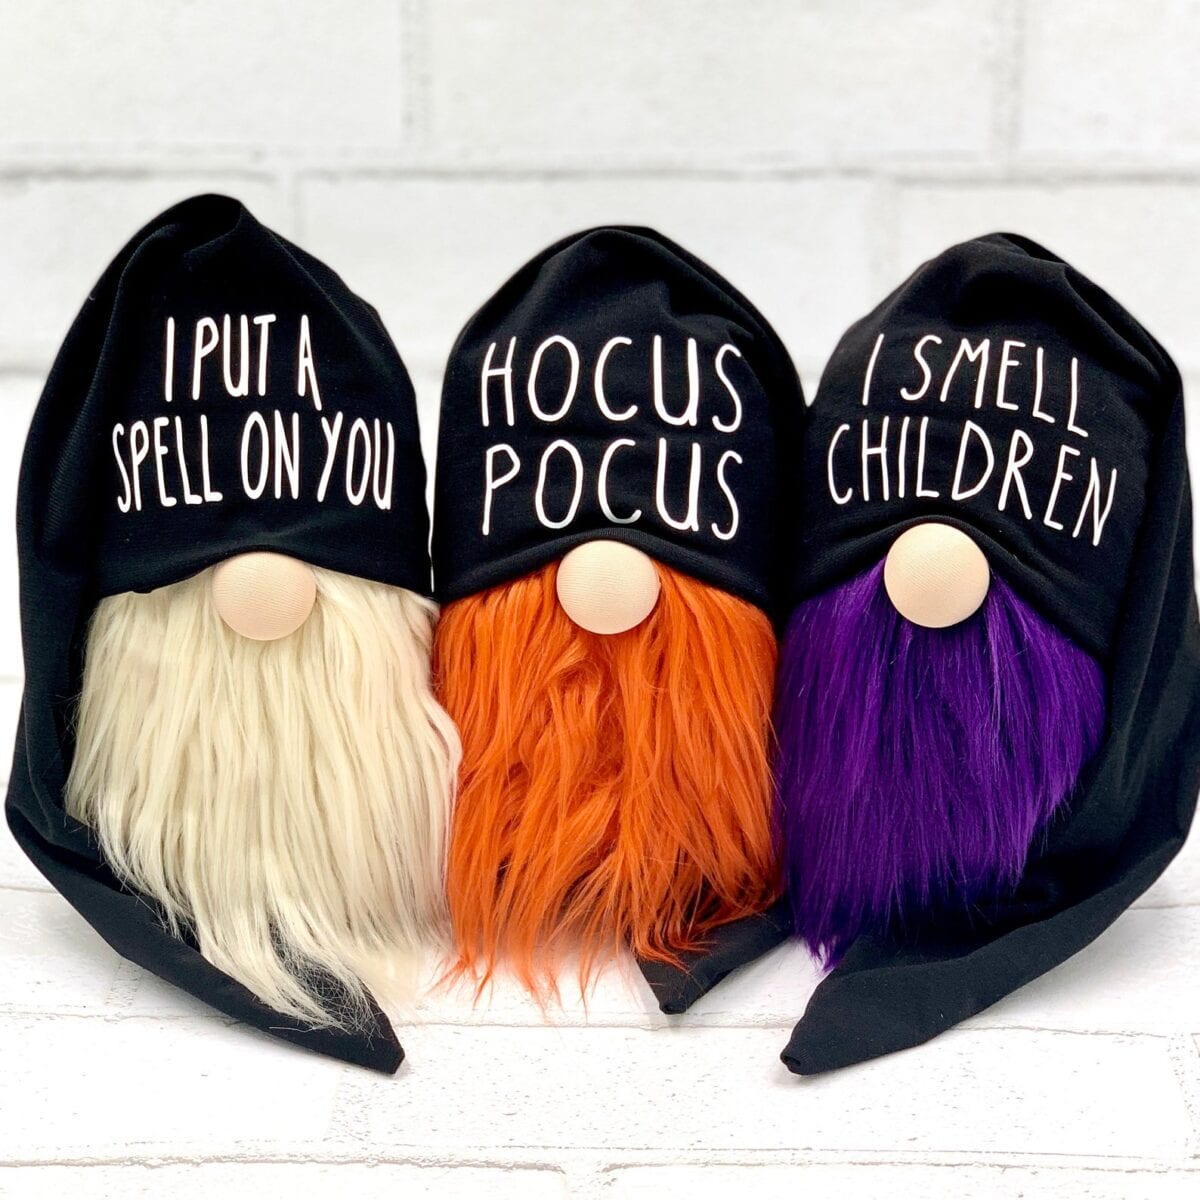 These Hocus Pocus Gnomes Will Ensure You Have Another Glorious Morning